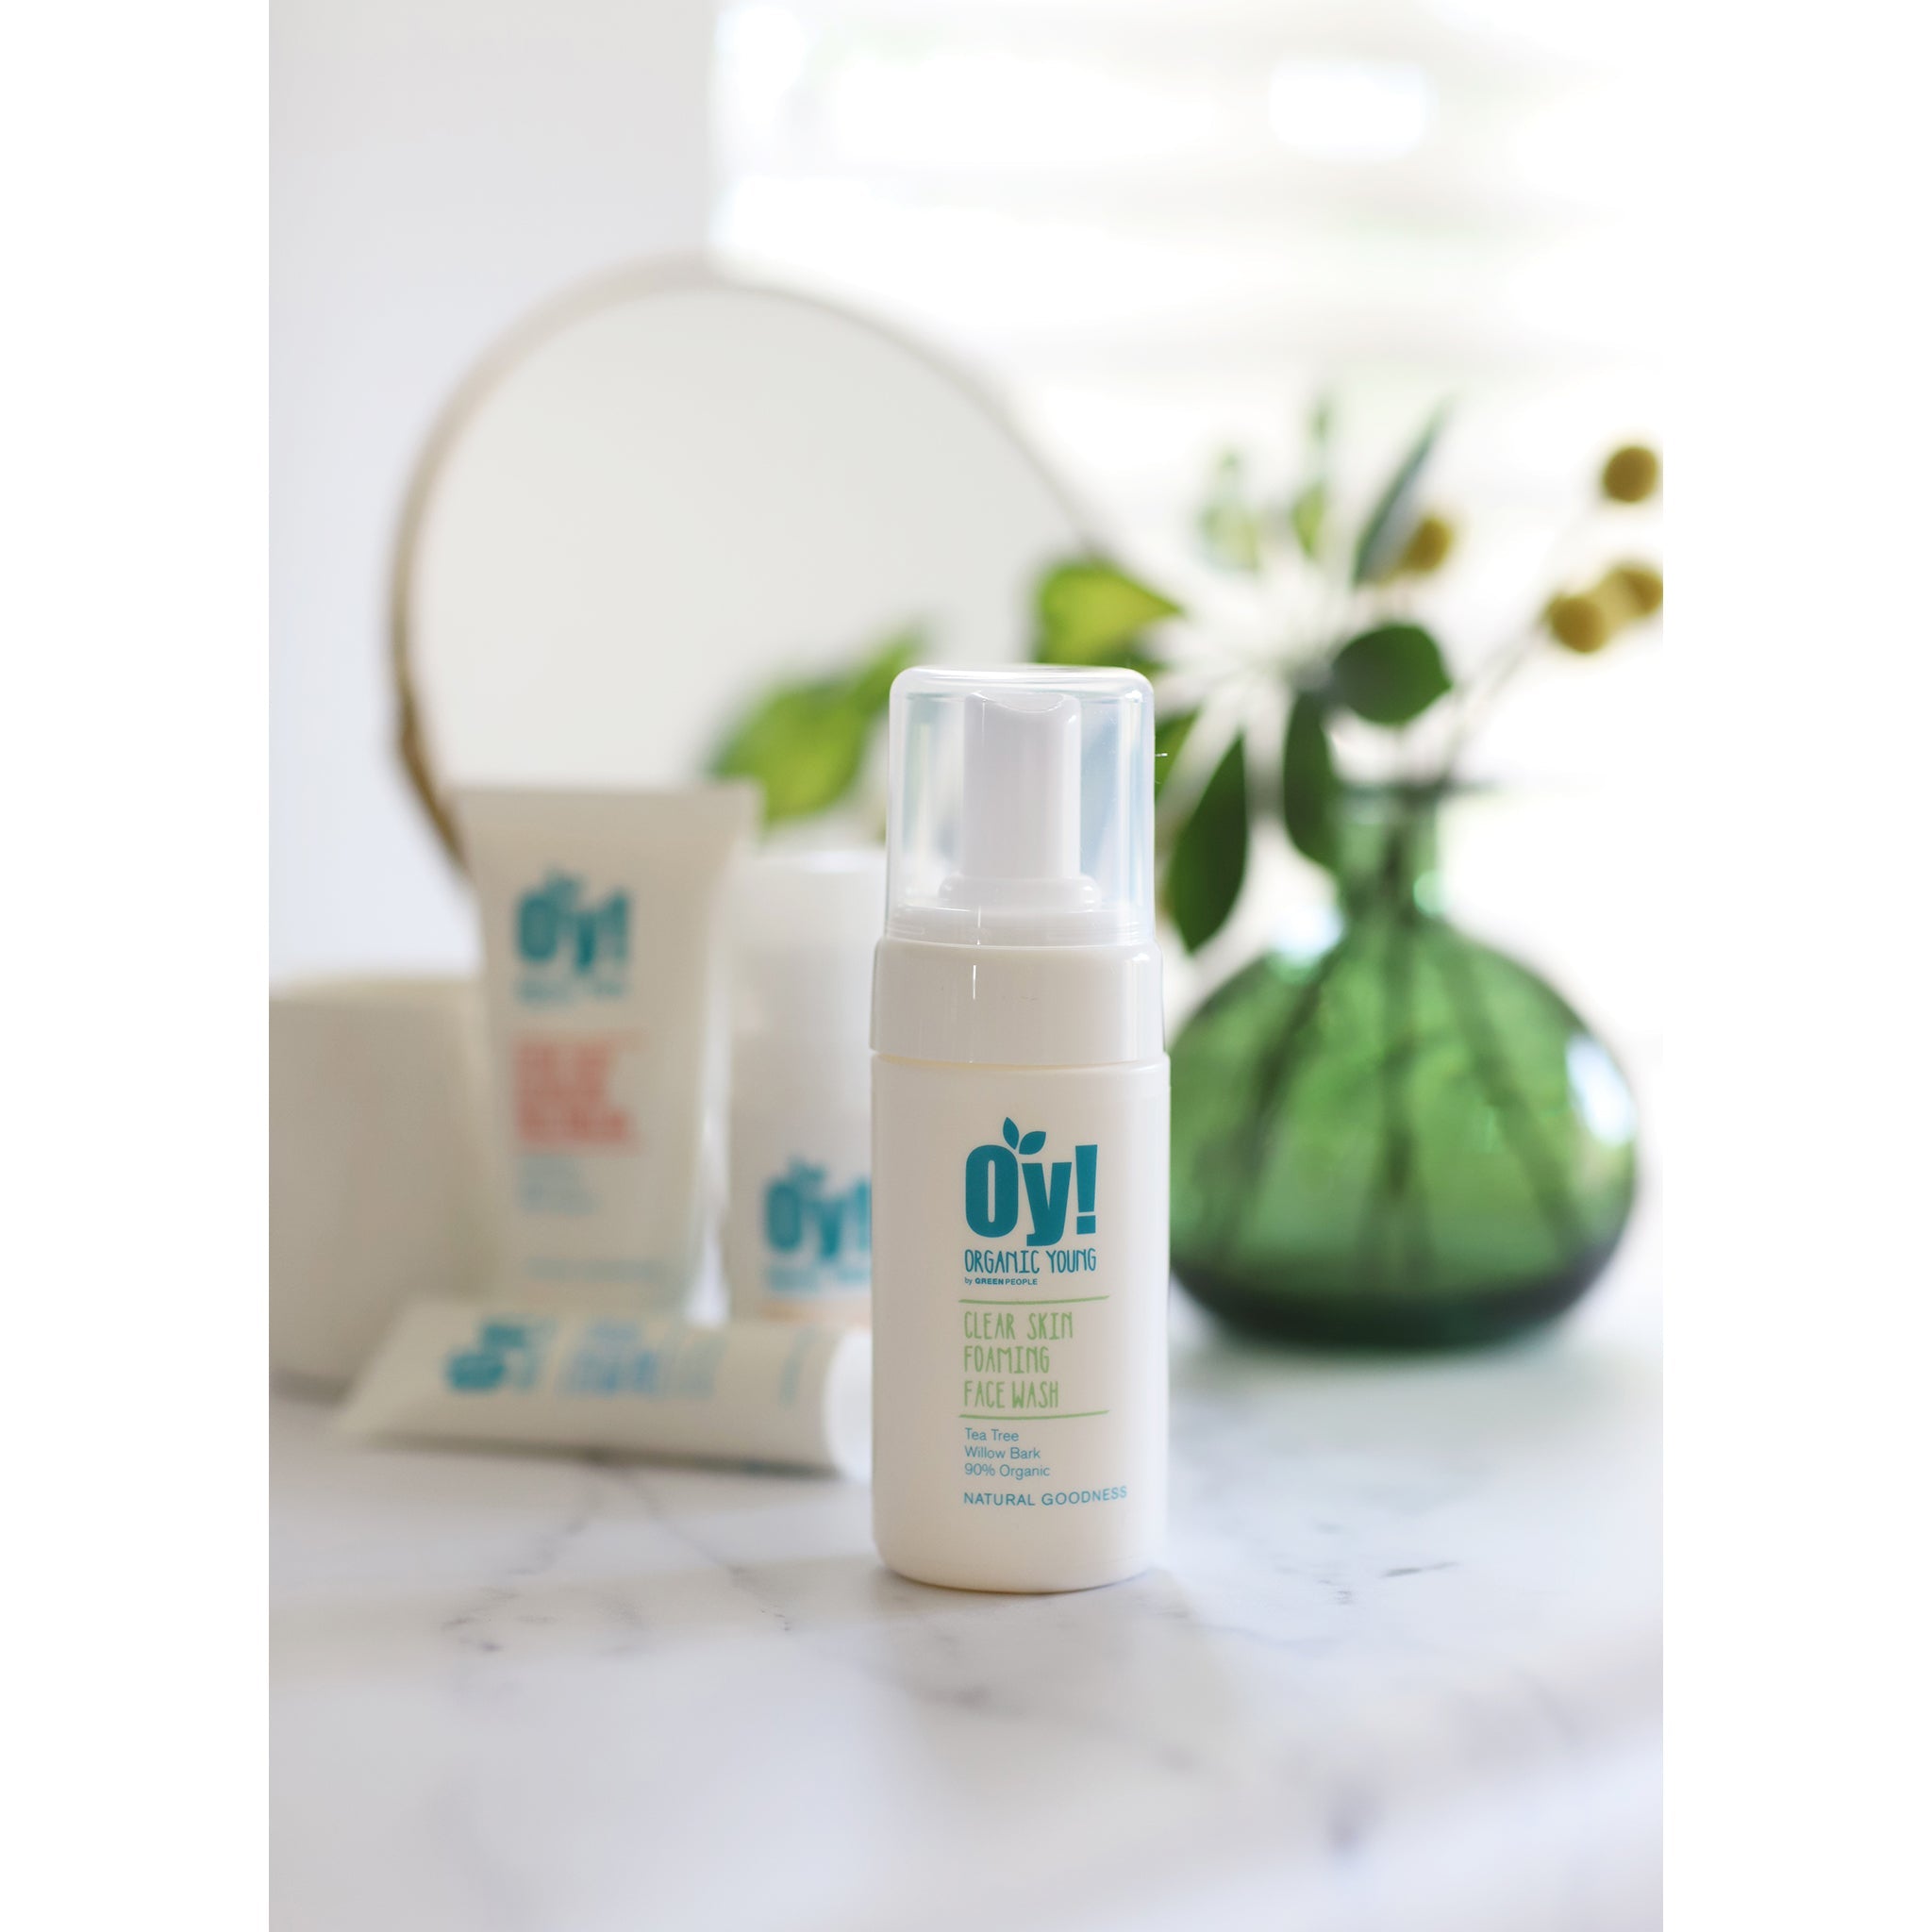 Oy! Clear Skin Foaming Face Wash - mypure.co.uk